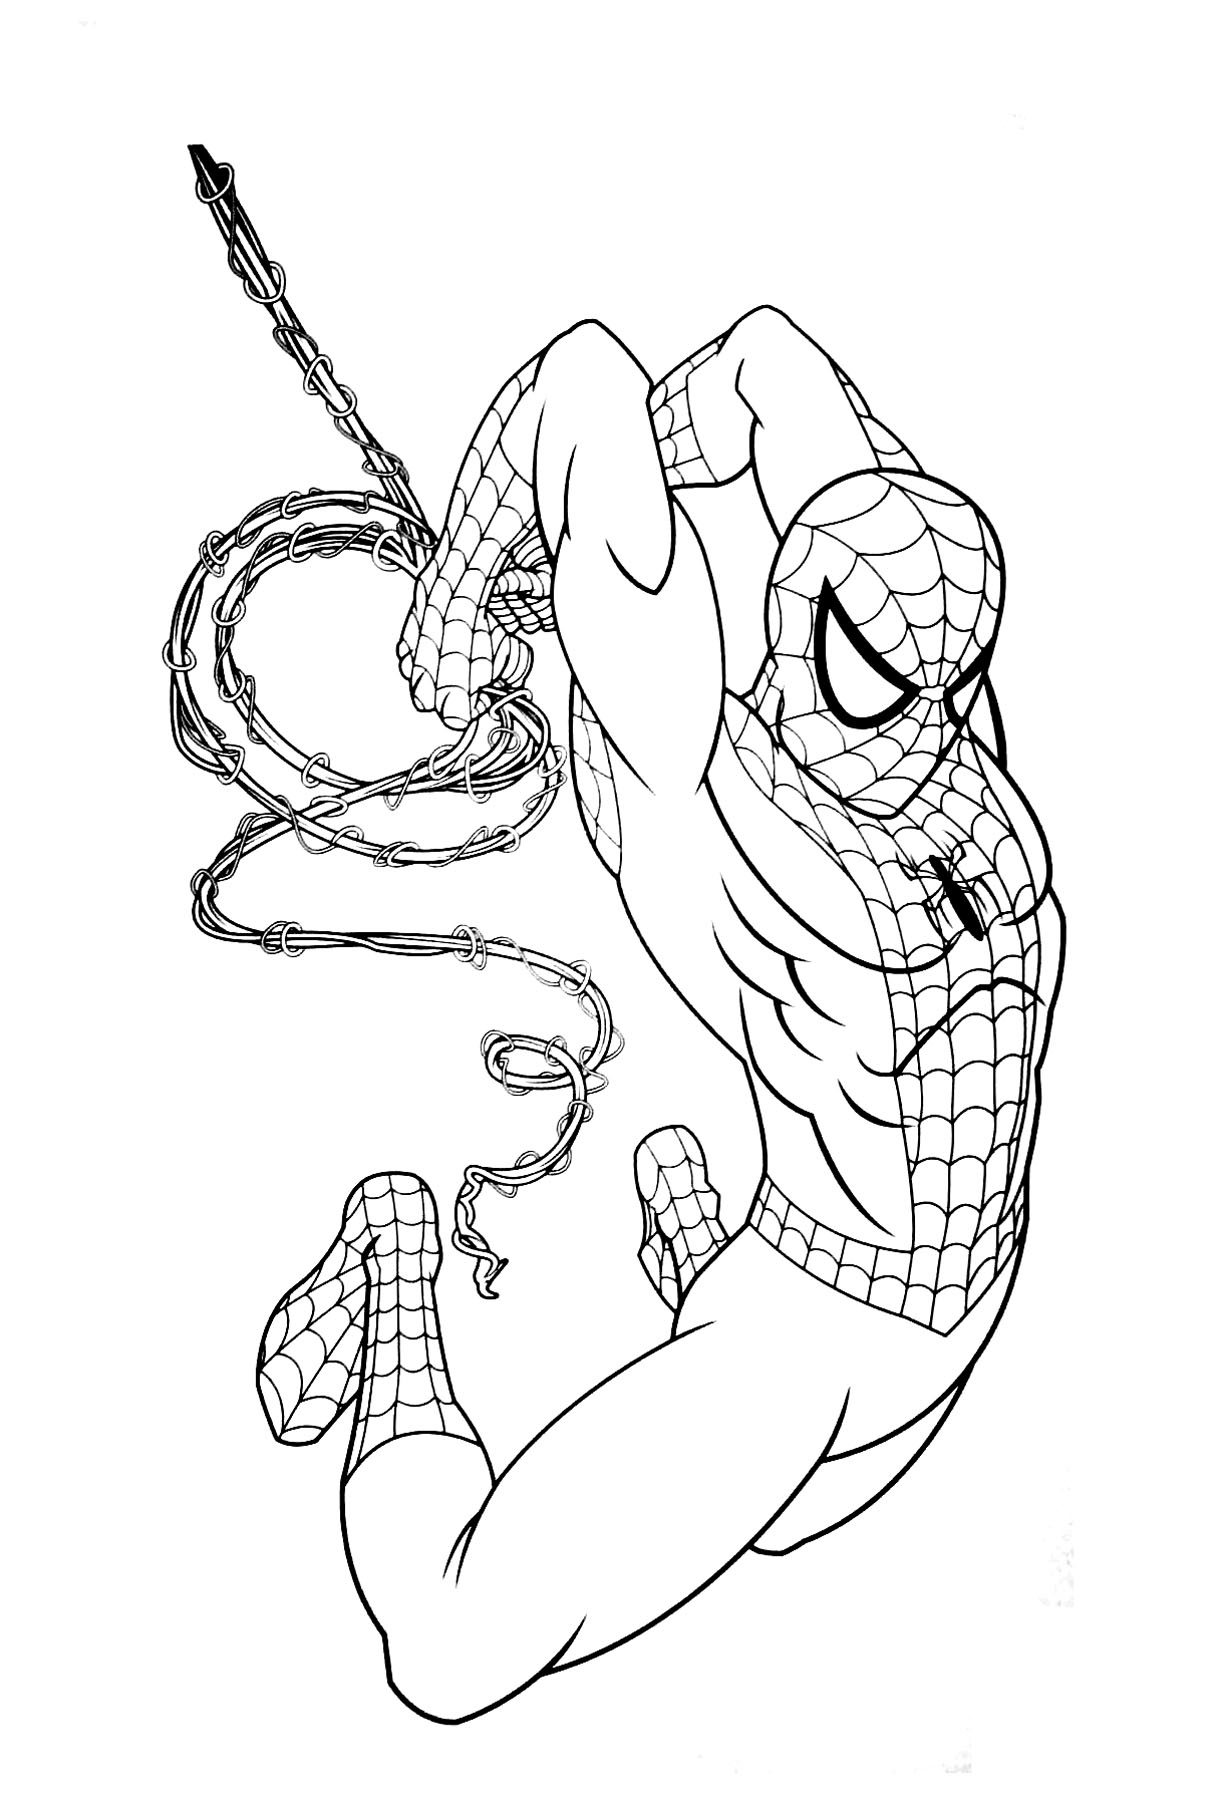 spiderman-free-to-color-for-children-spiderman-kids-coloring-pages